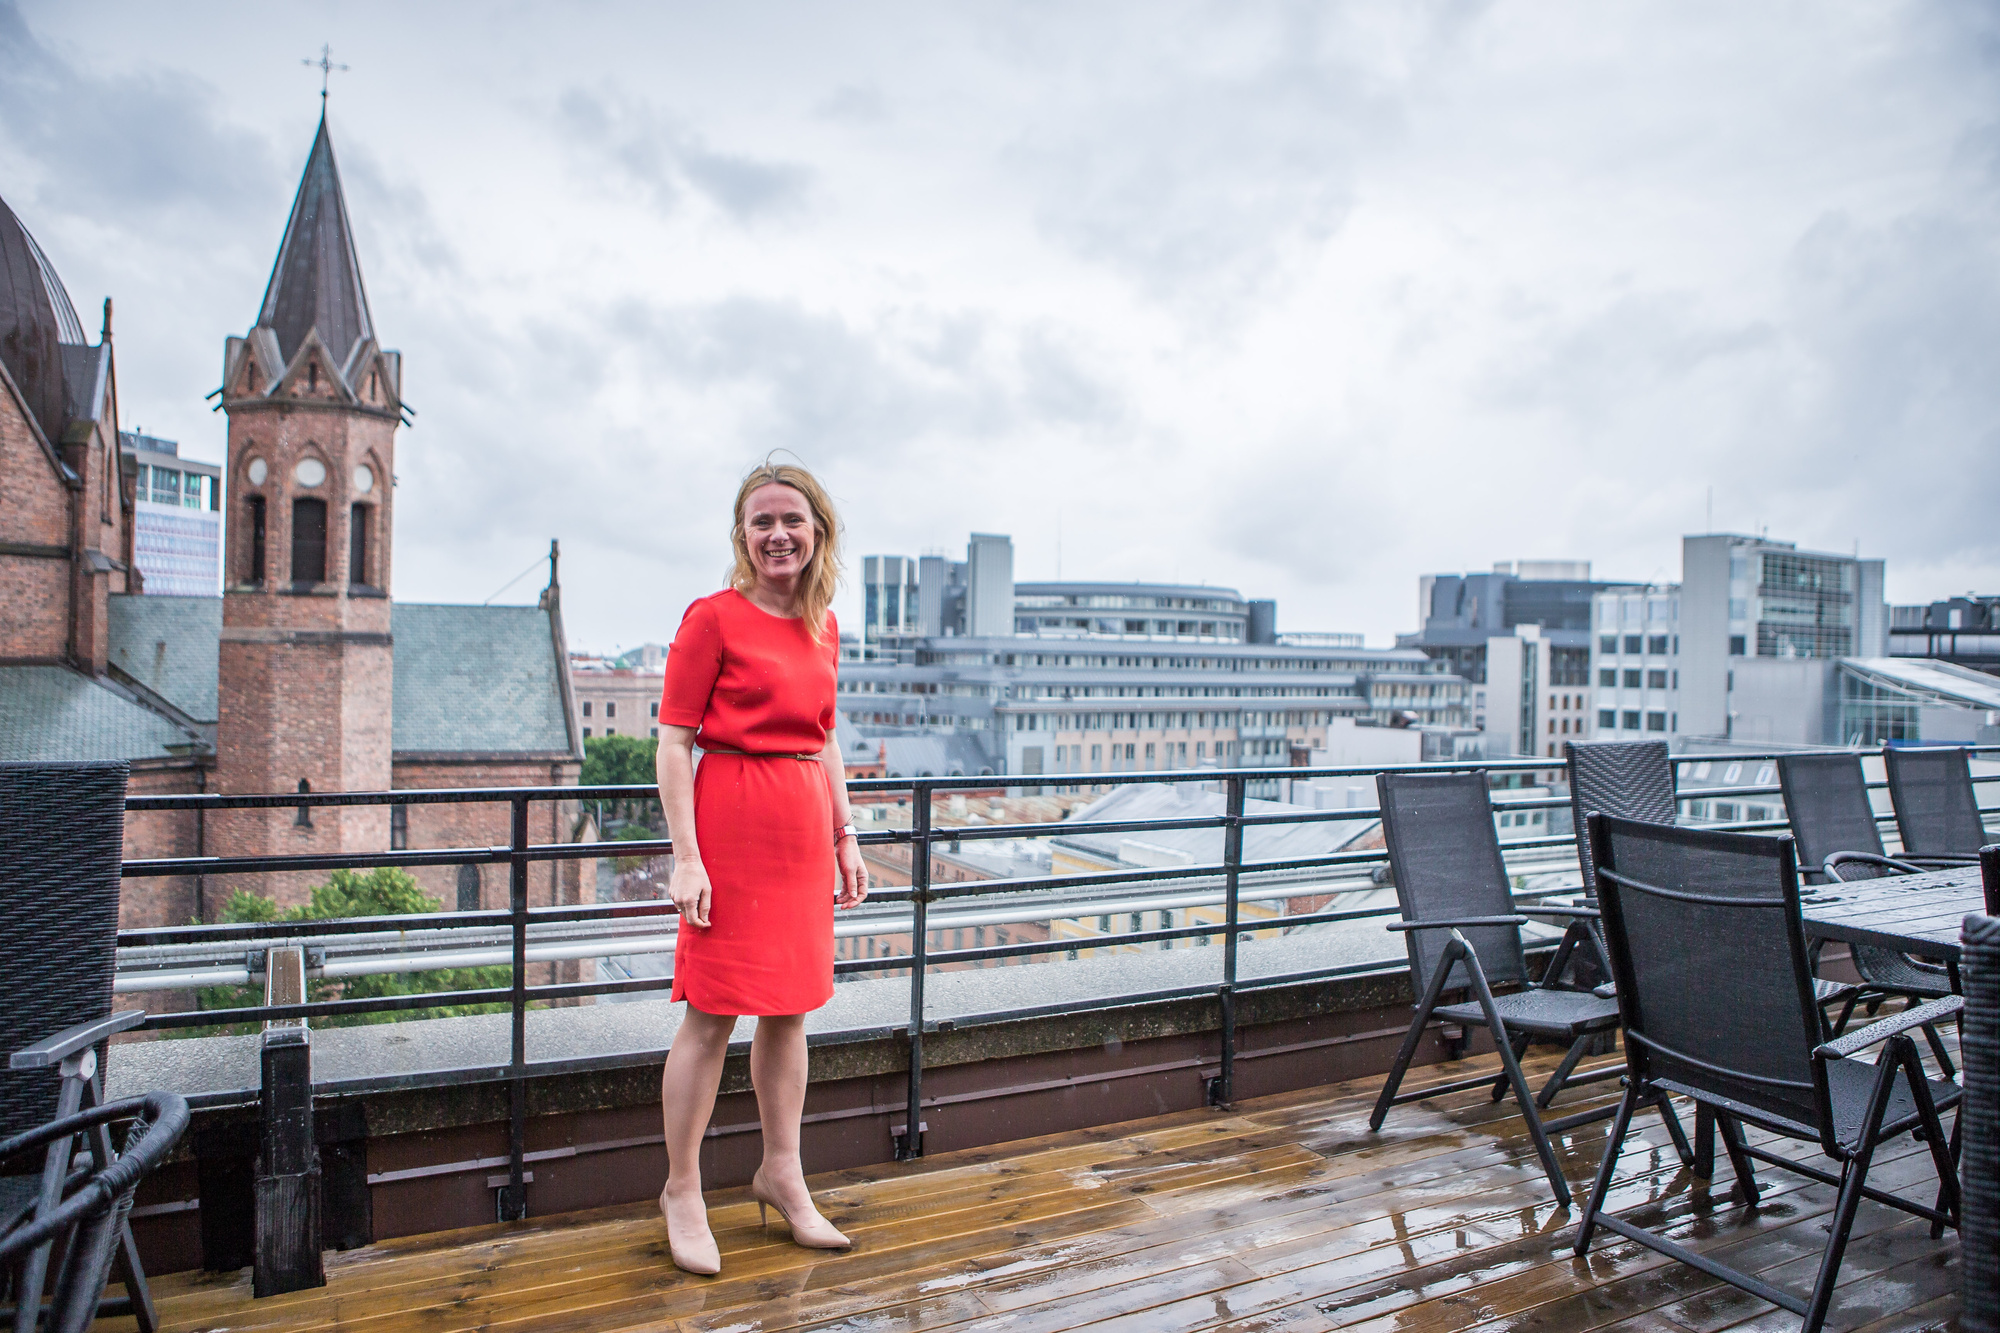 Norway's Minister of Labour Anniken Hauglie is passionate about social entrepreneurship